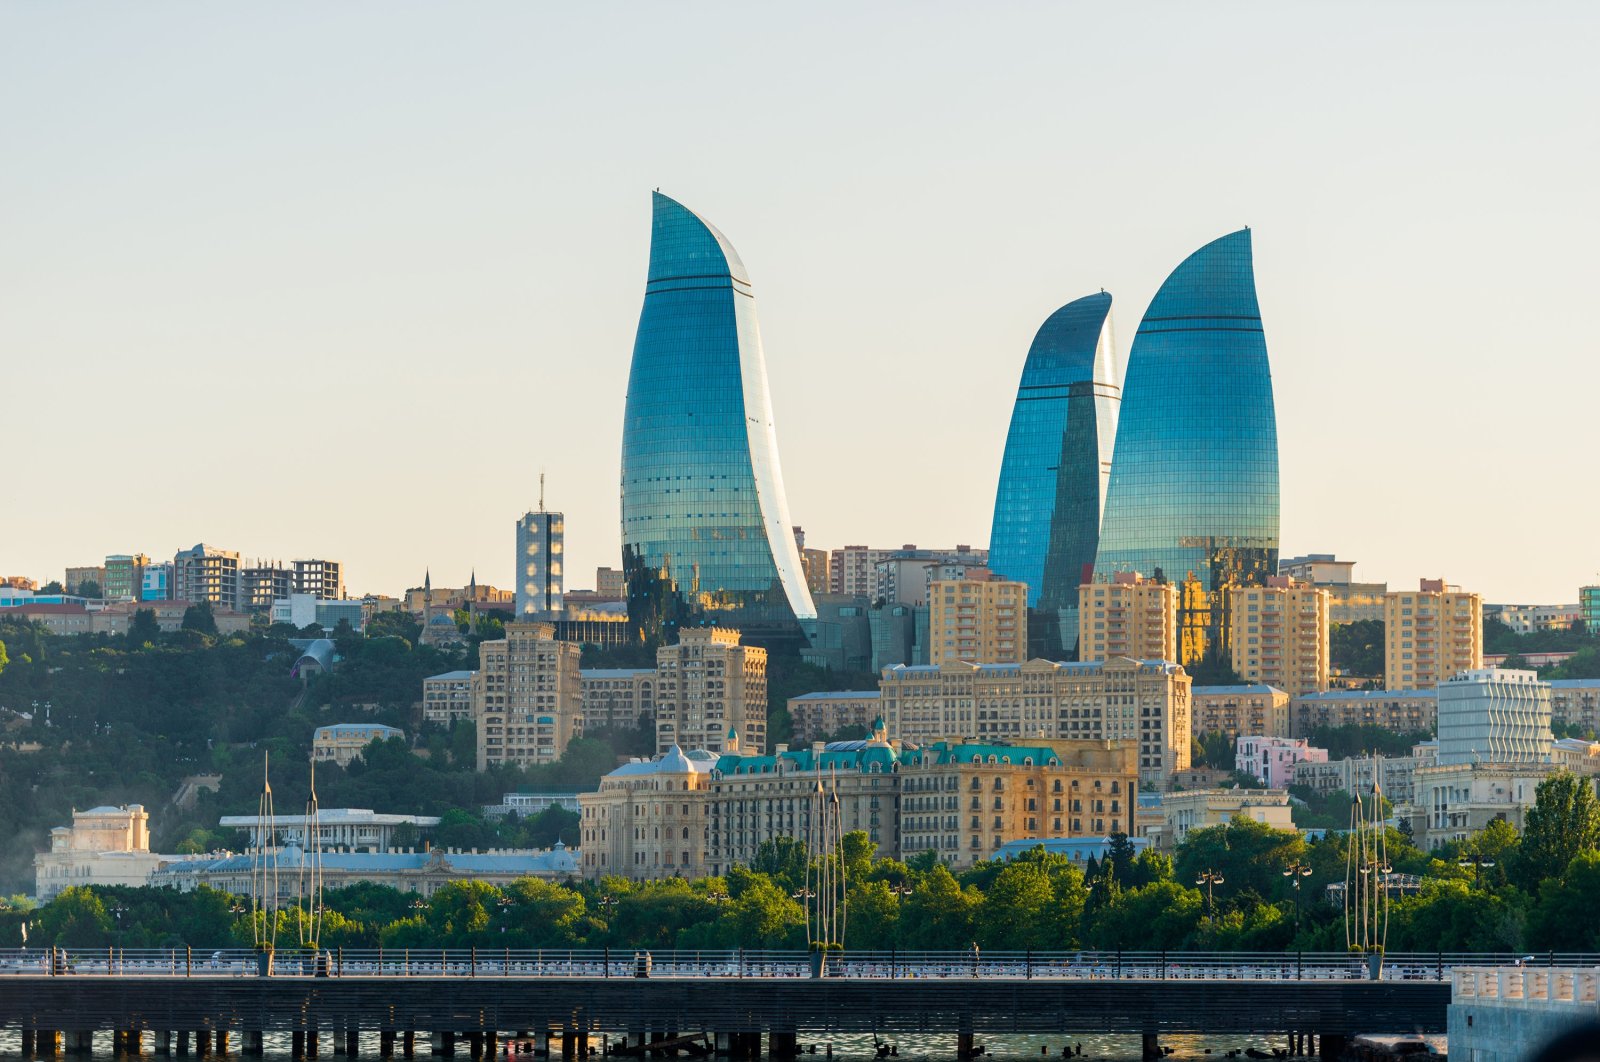 The city center and view of the Flame Towers in summers, Baku, Azerbaijan, June 23, 2018. (Shutterstock Photo)